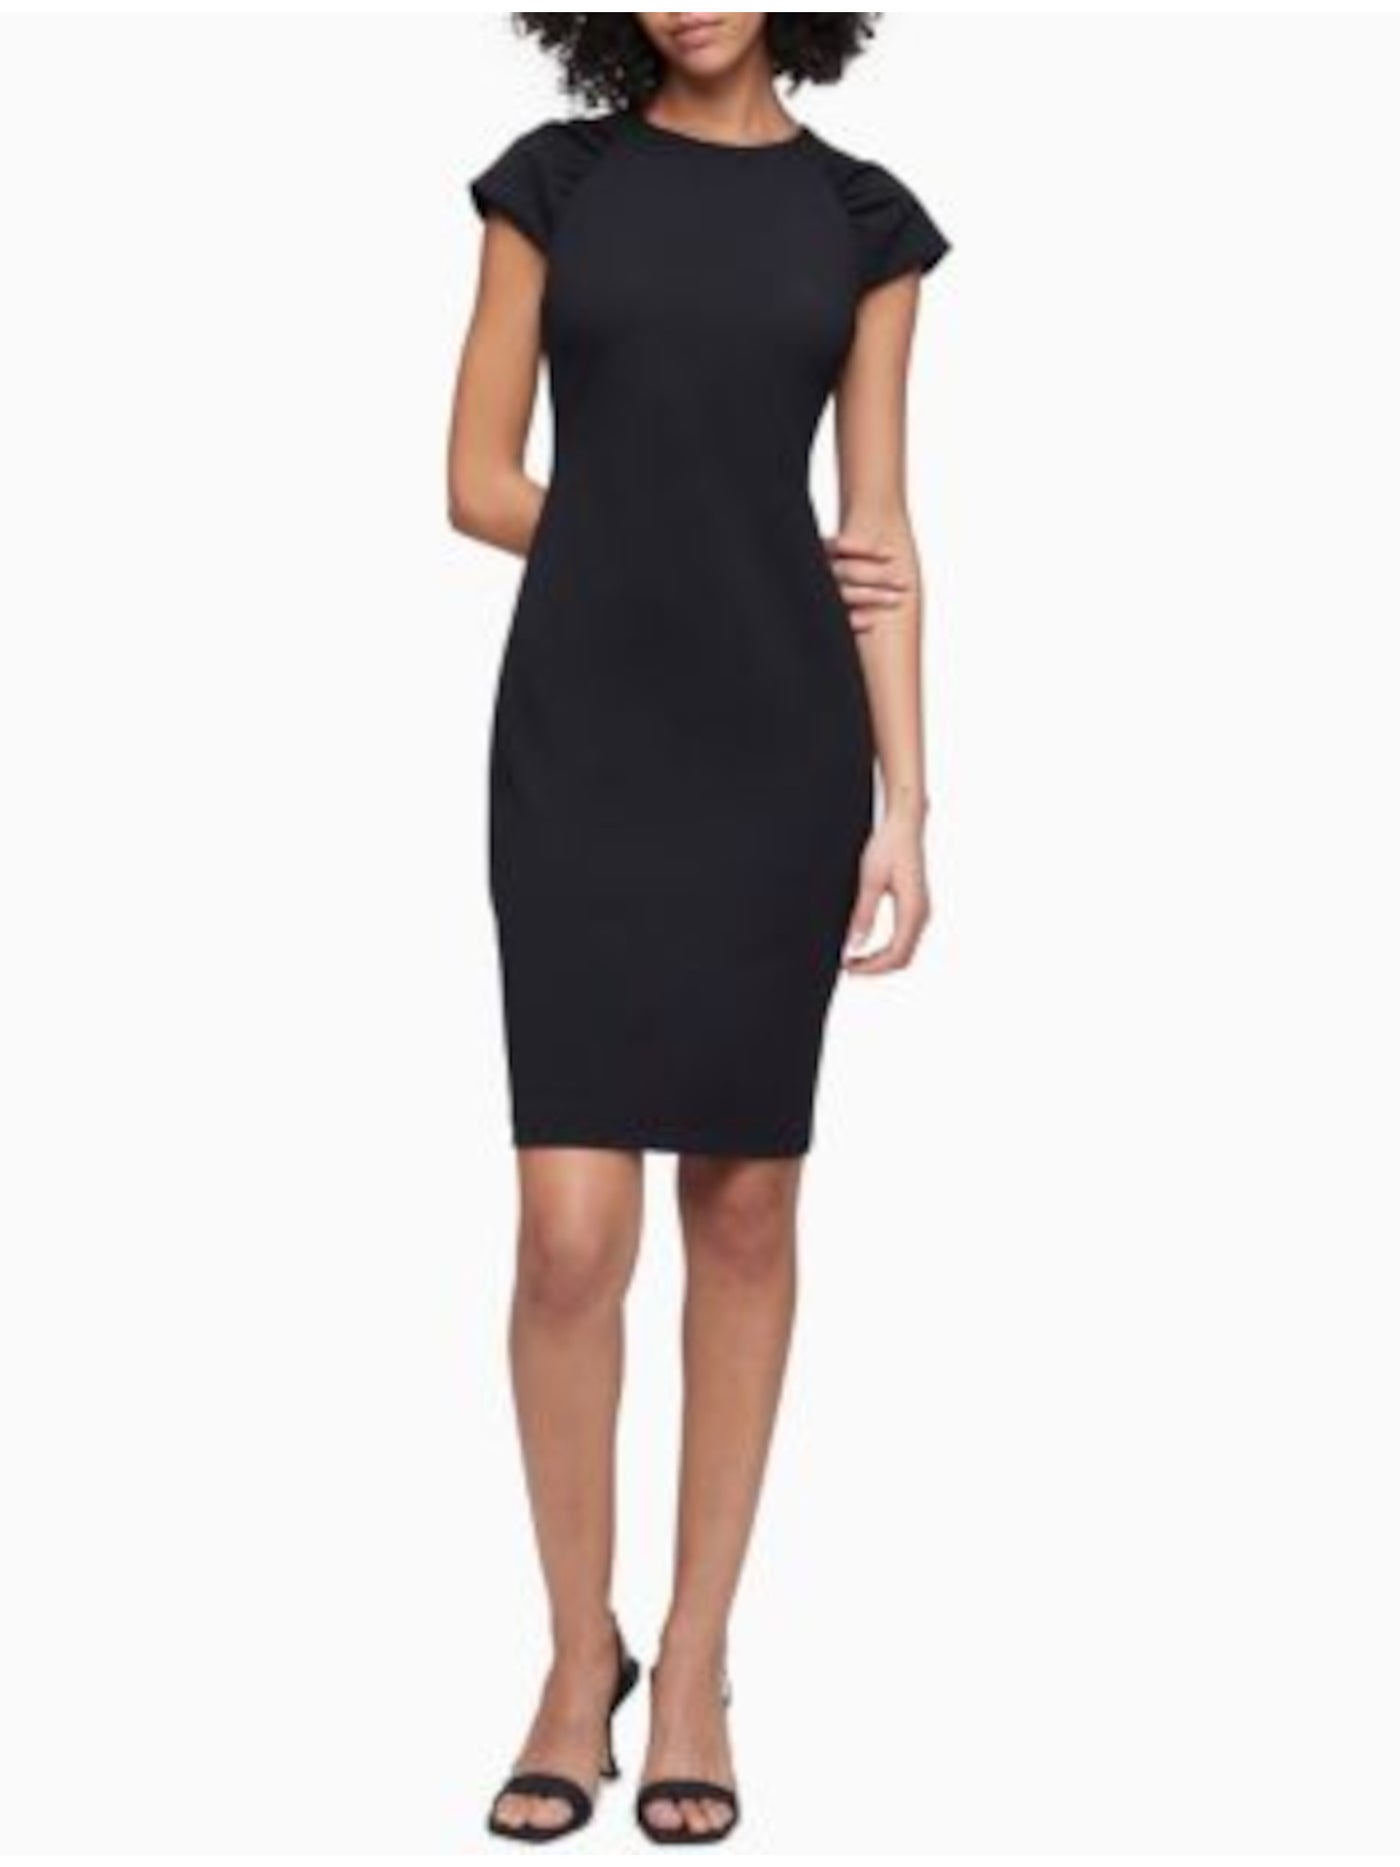 CALVIN KLEIN Womens Black Stretch Zippered Darted Ruched Cap-sleeve Crew Neck Above The Knee Wear To Work Sheath Dress 12